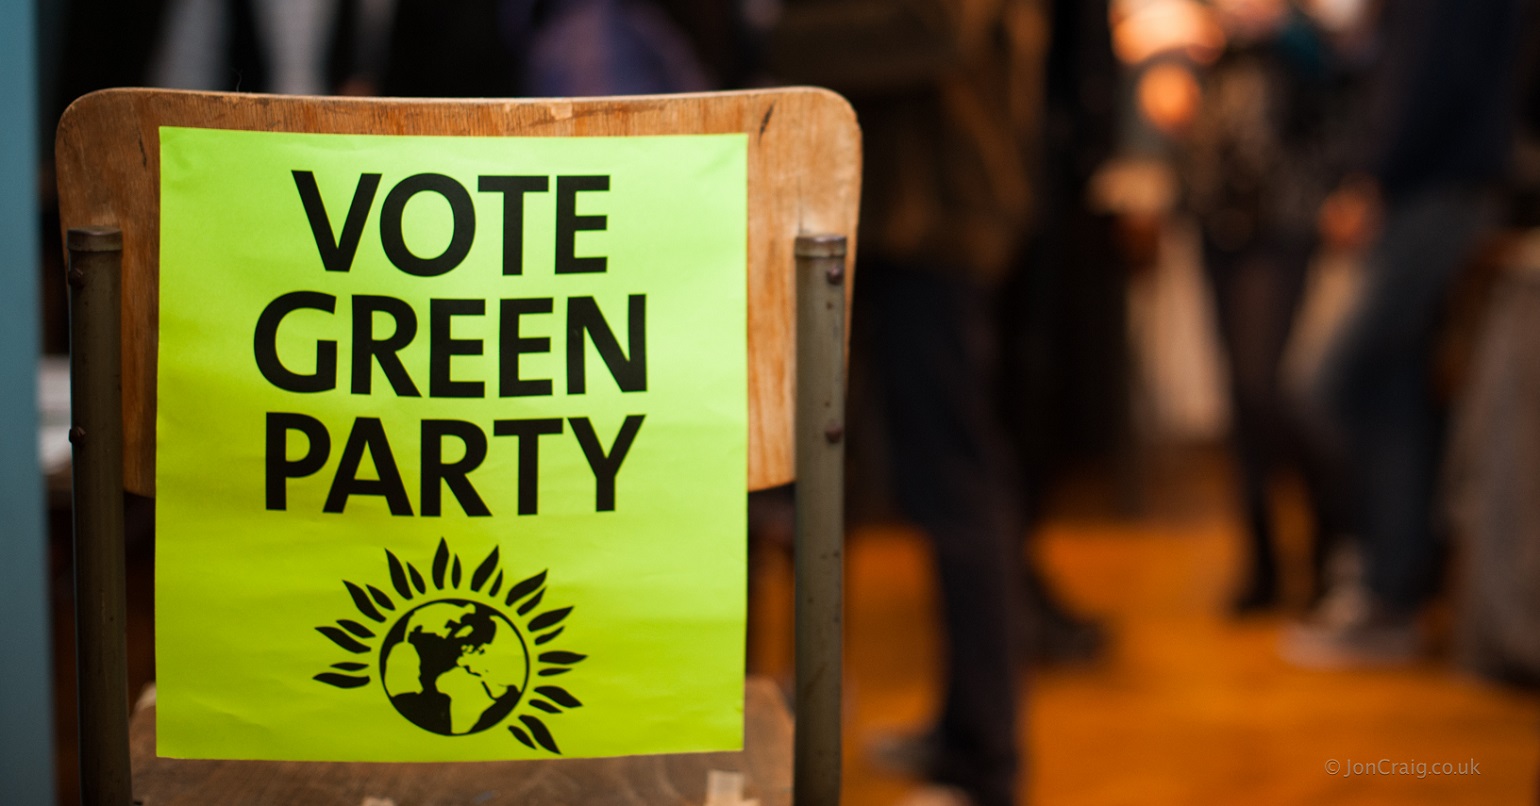 Will the Green Party retain control of Brighton & Hove Council?